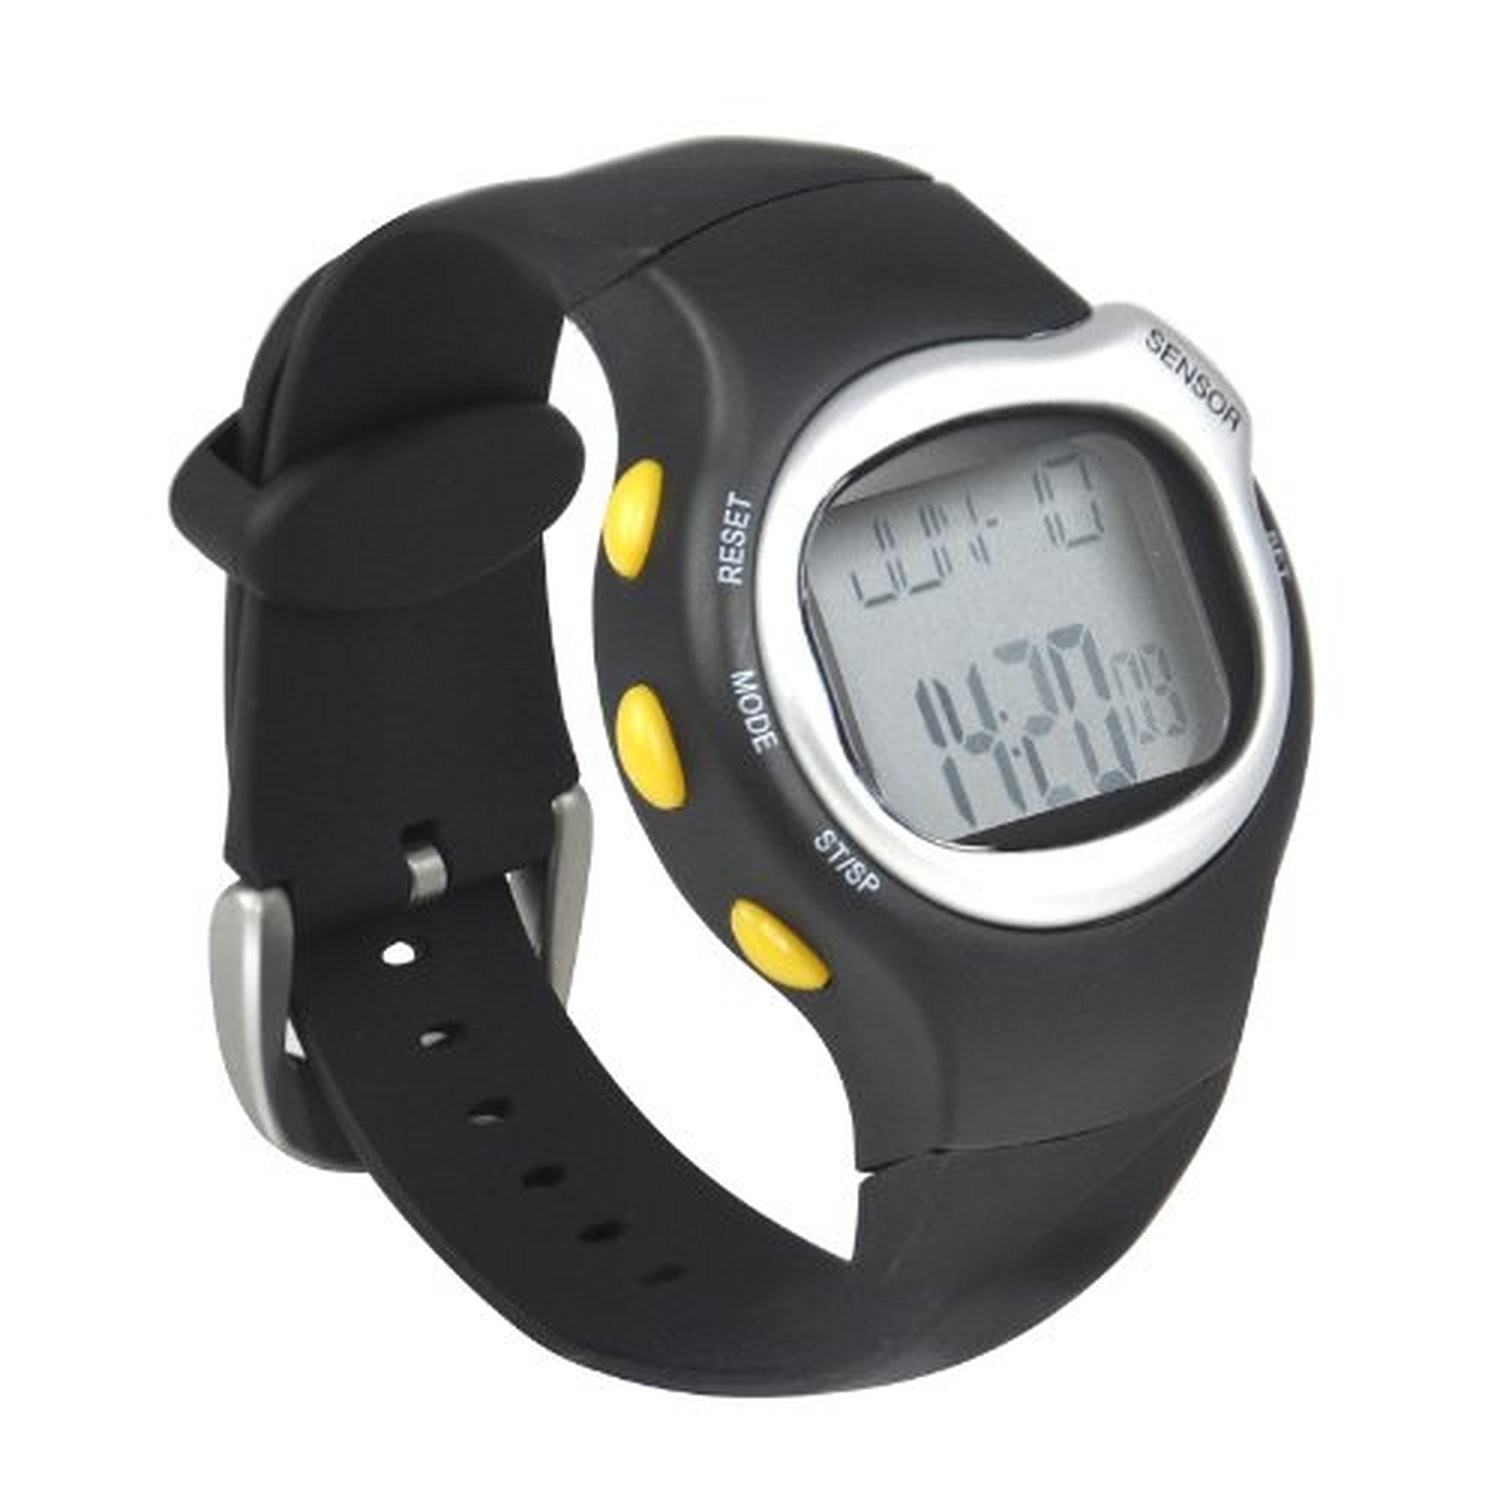 Heart Rate Pulse Monitor Watch Sports Fitness Gym Exercise Calorie Counter Alarm Clock Unisex By AoE Performance